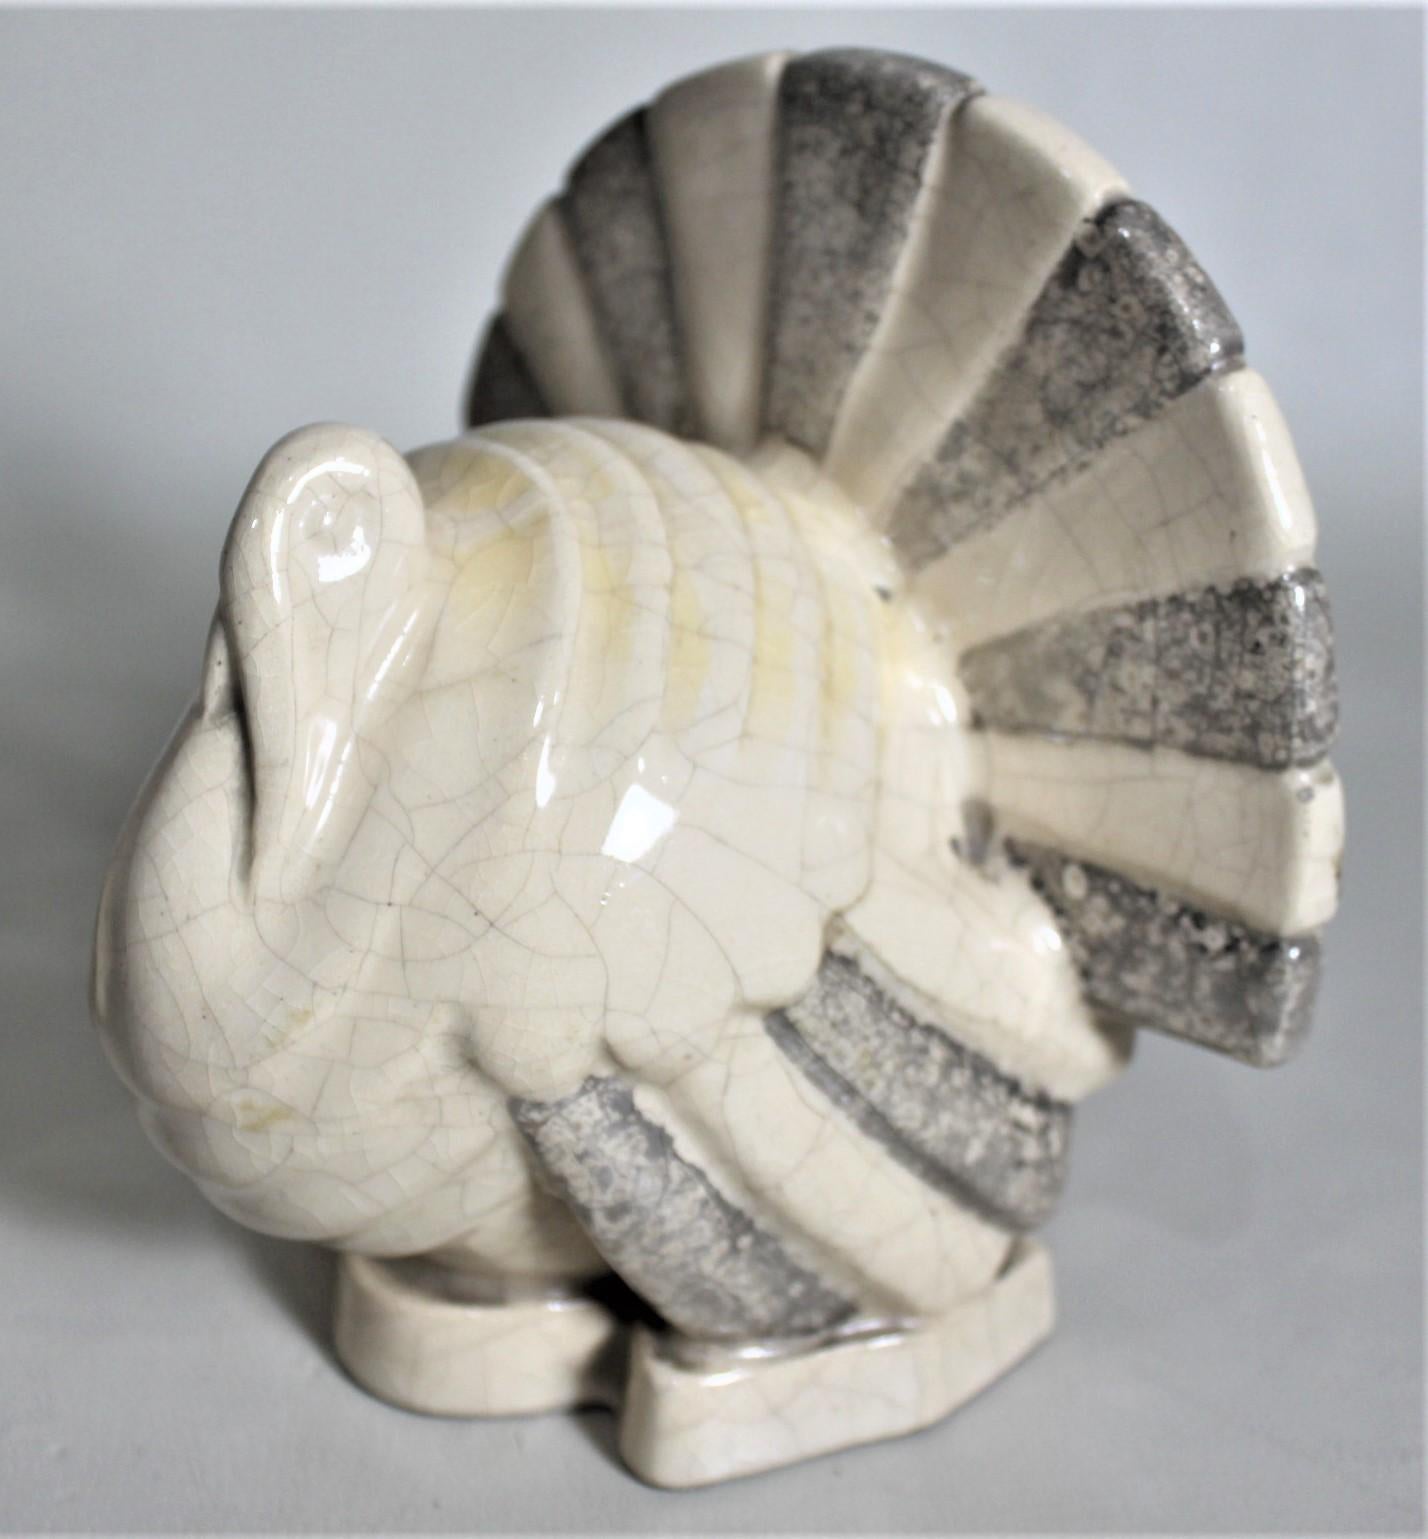 Art Deco Figural Ceramic Turkey Bookends in Taupe and Charcoal Grey Luster Glaze For Sale 5